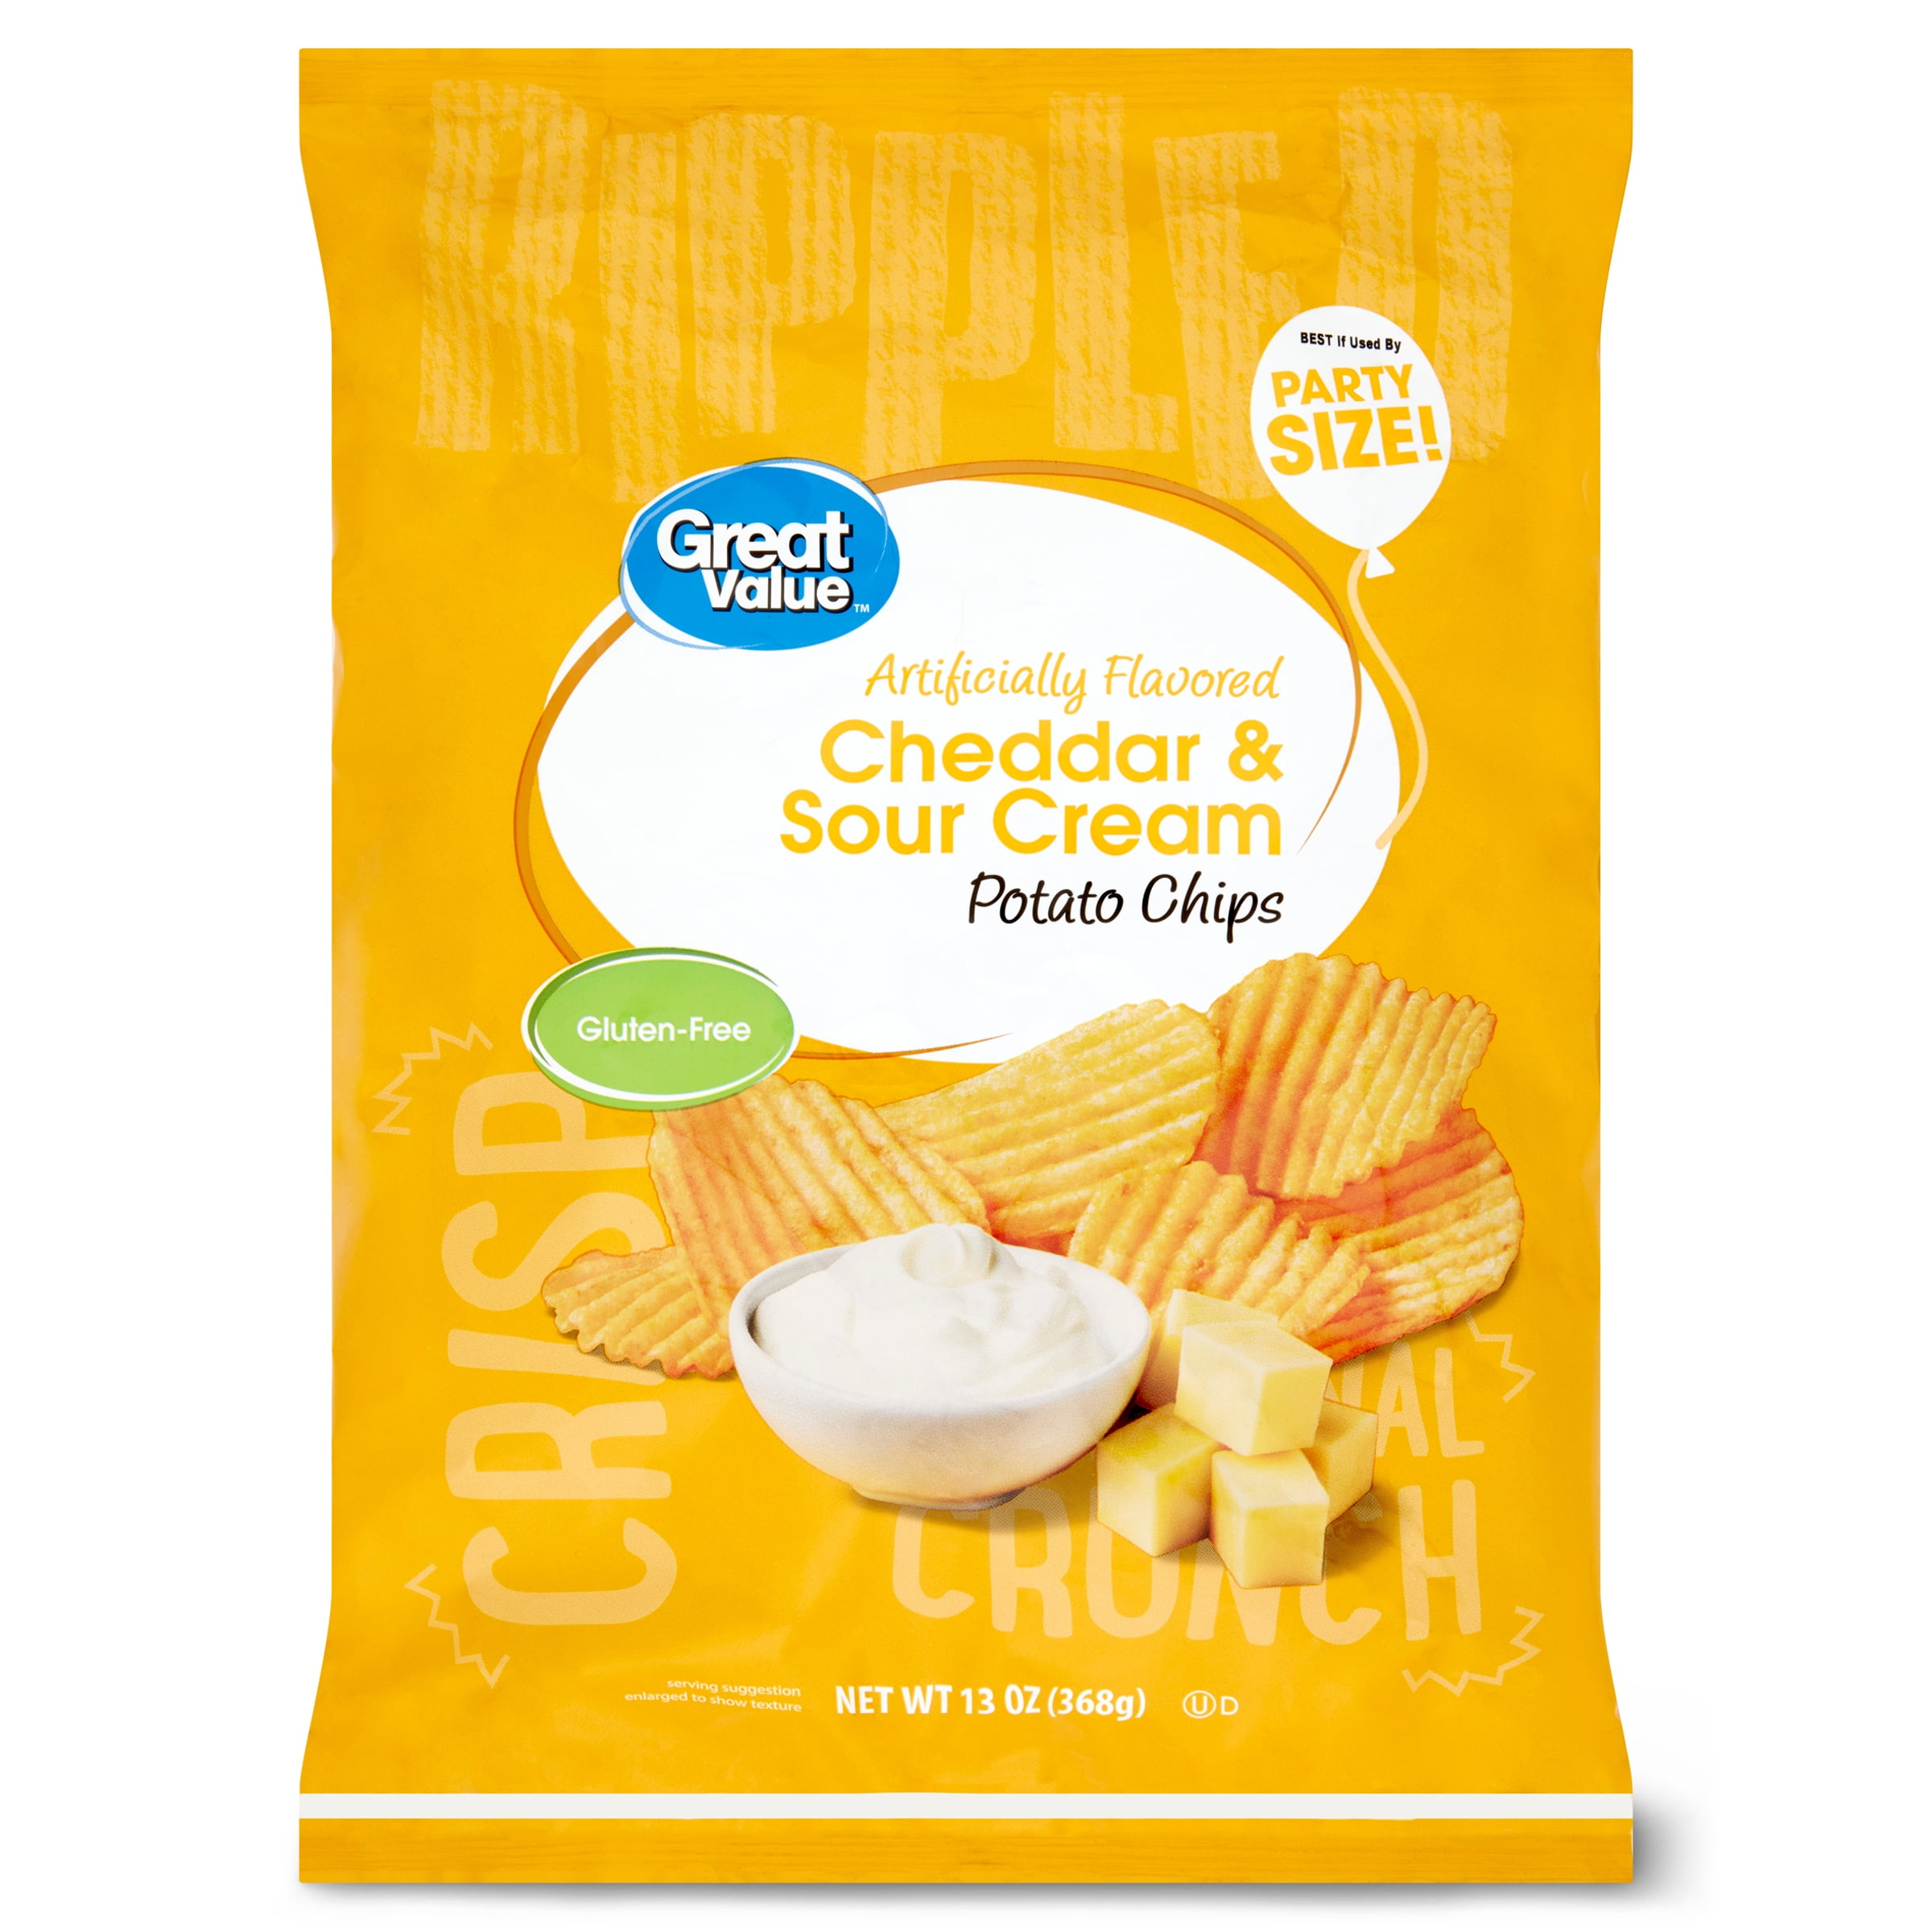 Great Value Cheddar & Sour Cream Potato Chips Party Size!, 13 oz